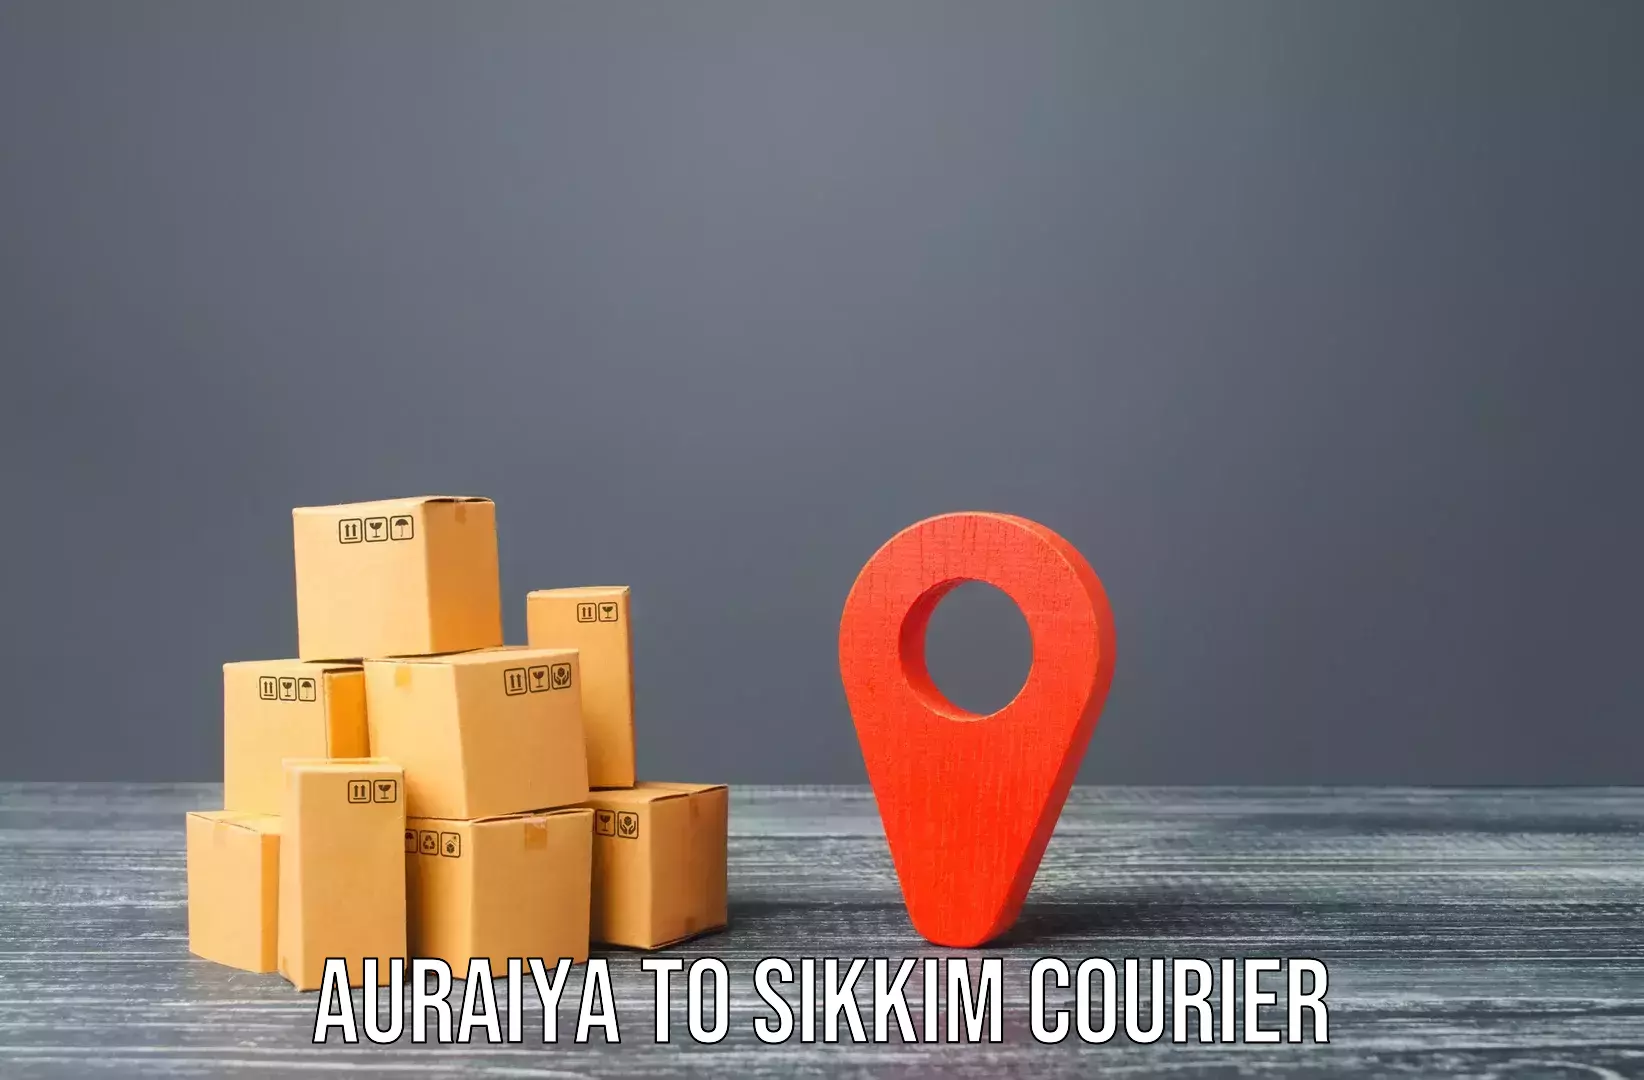 Furniture moving specialists Auraiya to Pelling